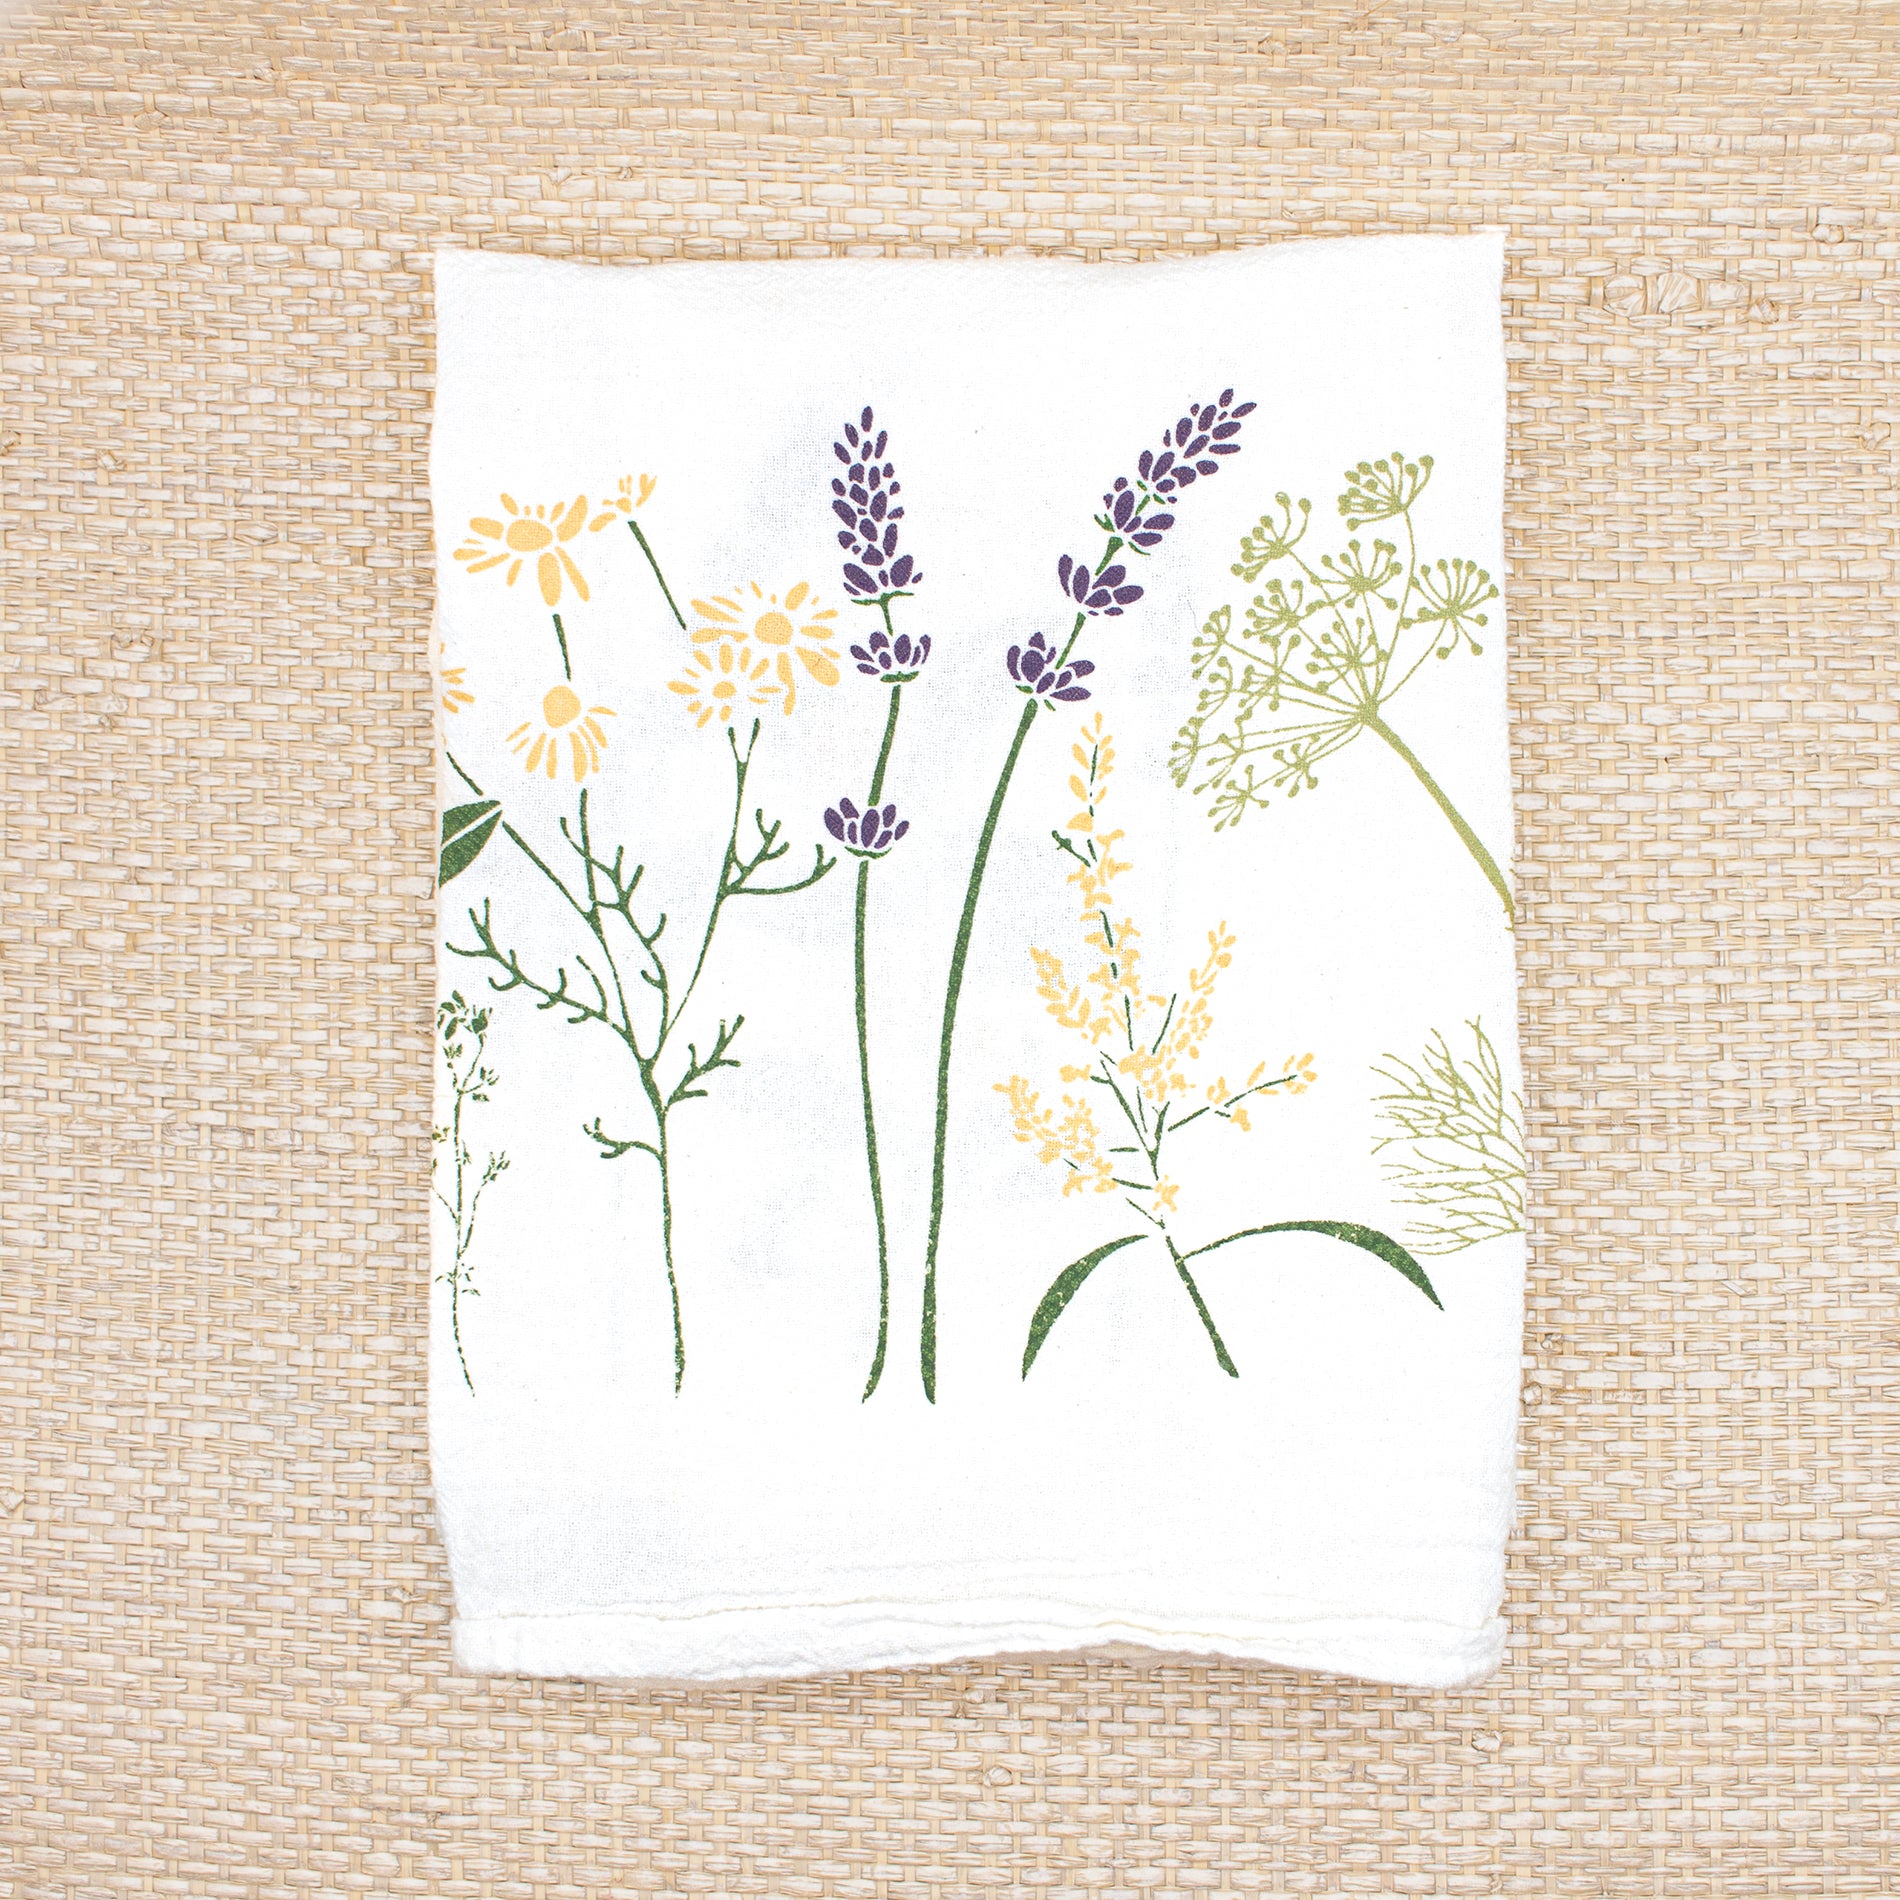 A folded June & December branded white tea towel with herb and flower designs.